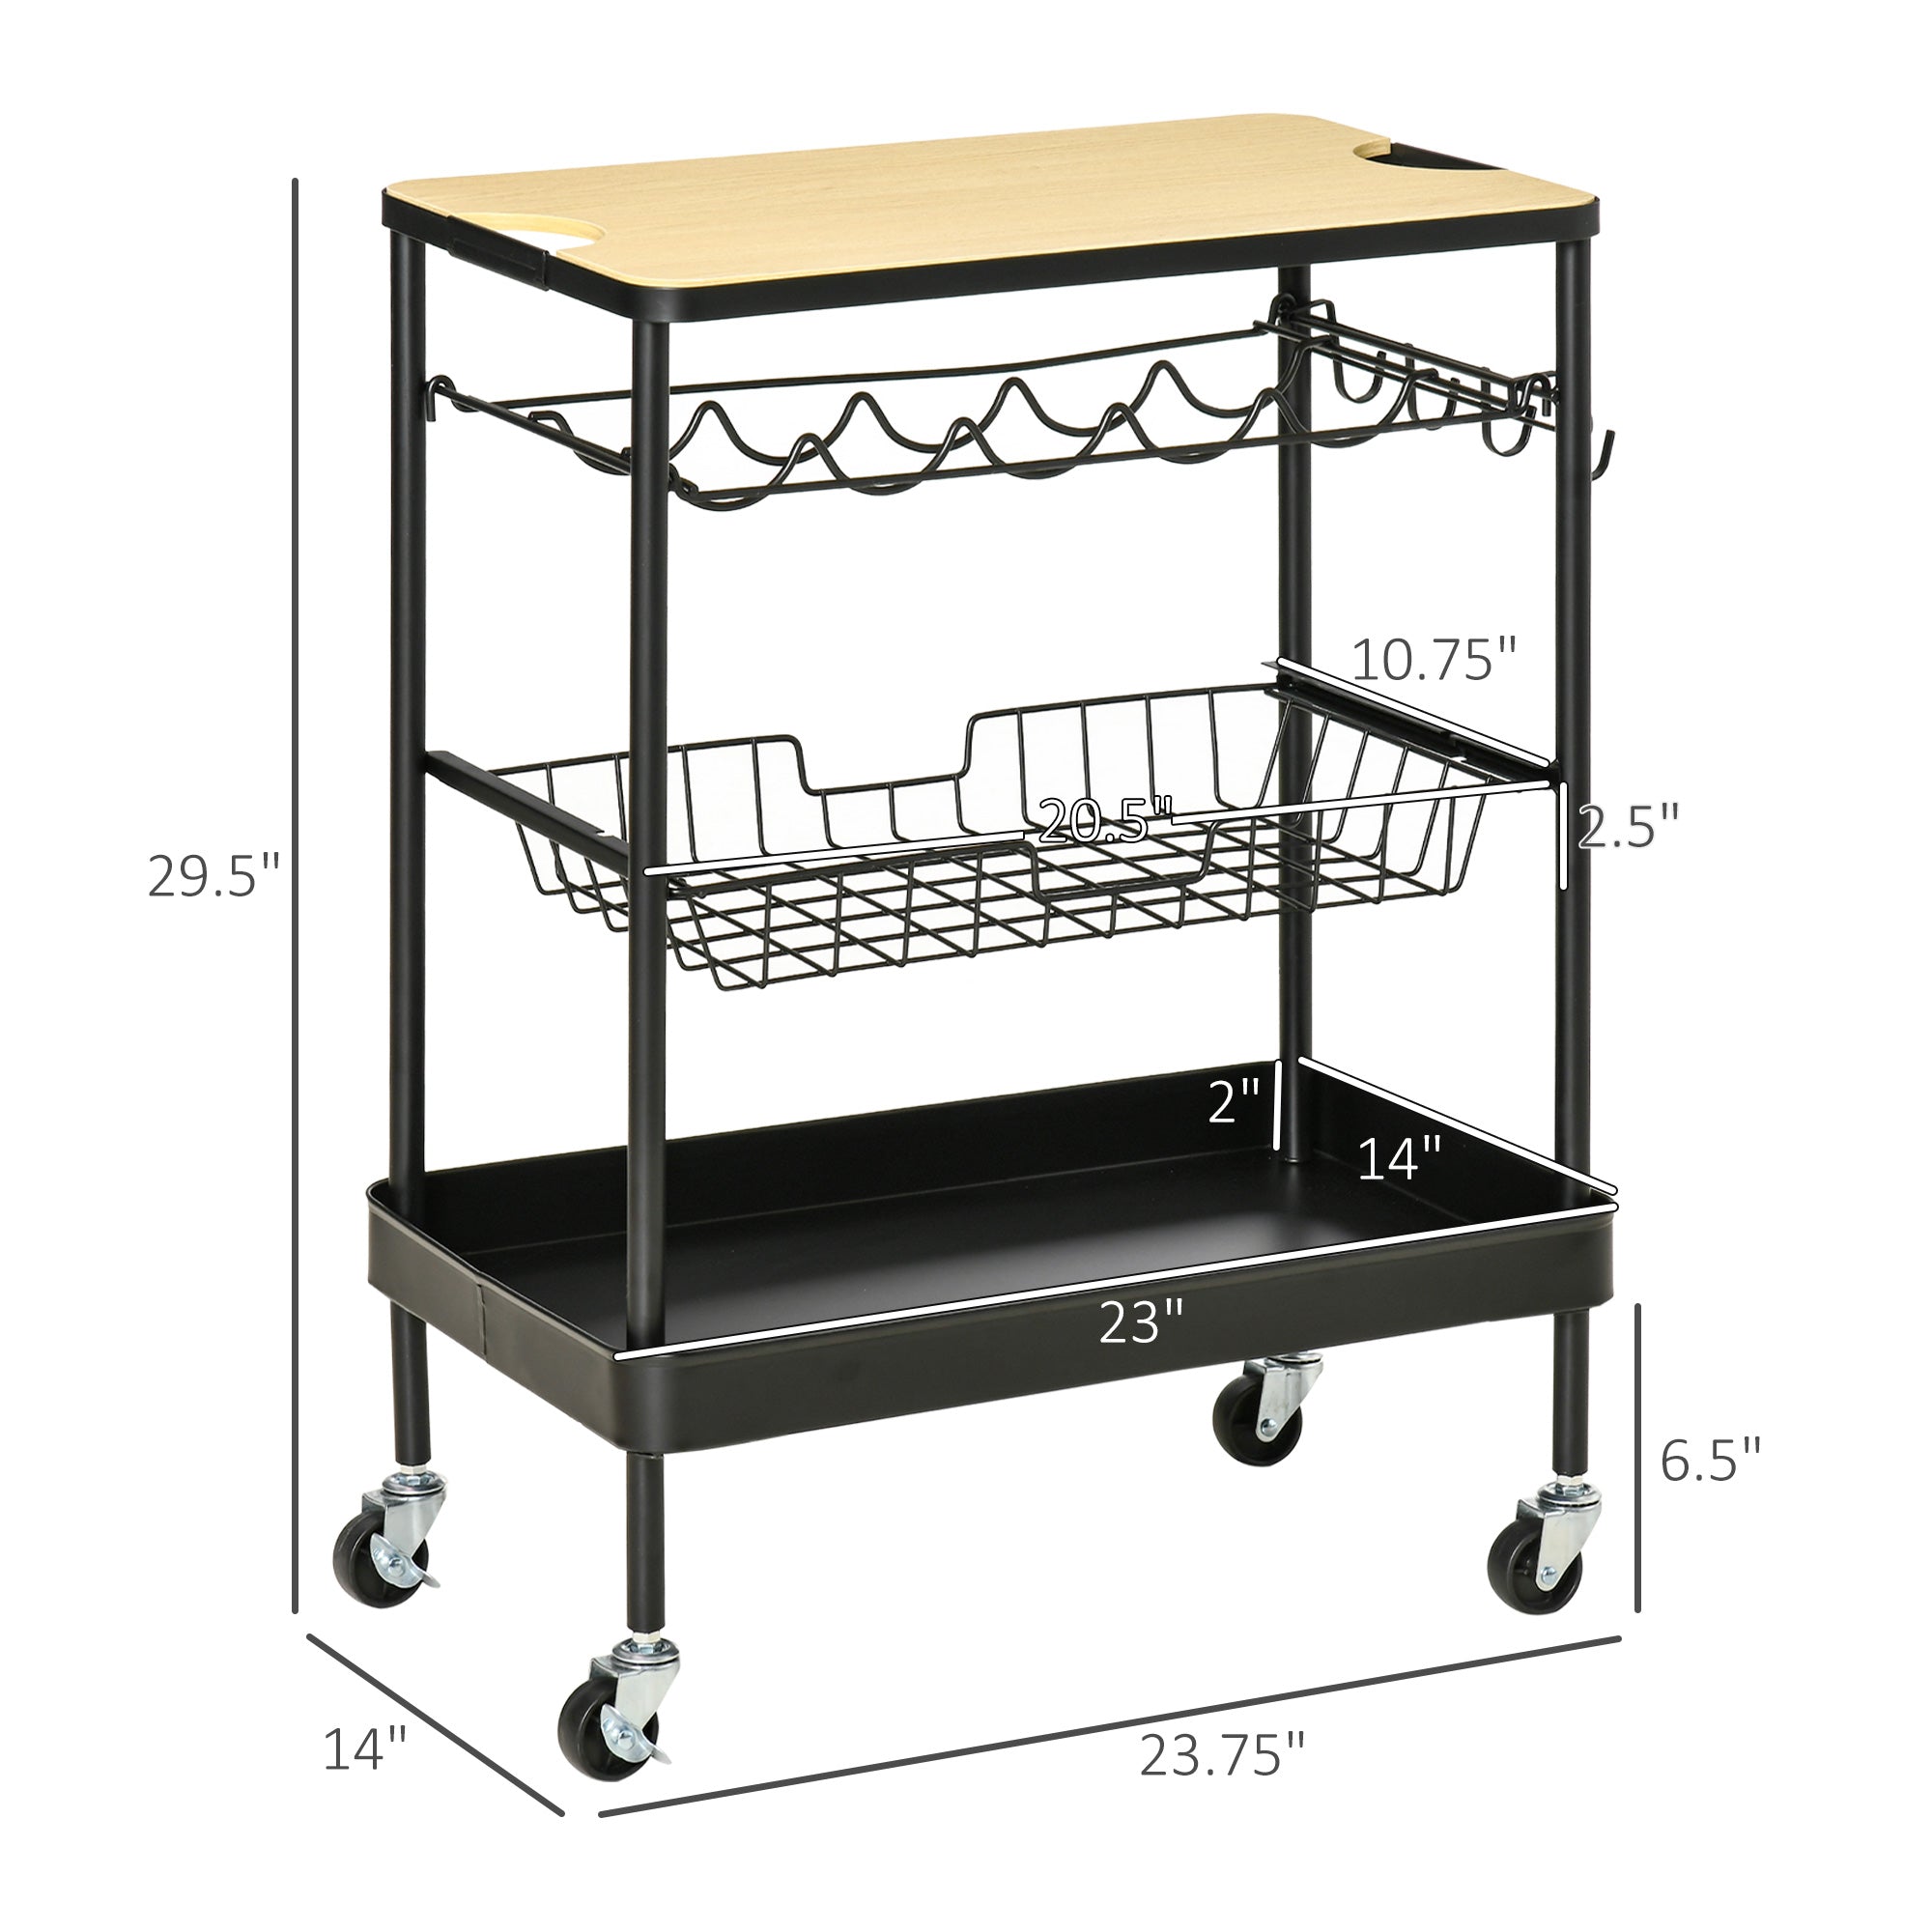 HOMCOM Rolling Kitchen Cart， 3-Tier Utility Storage Trolley with Wine Rack， Mesh Drawer and Side Hooks for Dining Room， Black/Natural